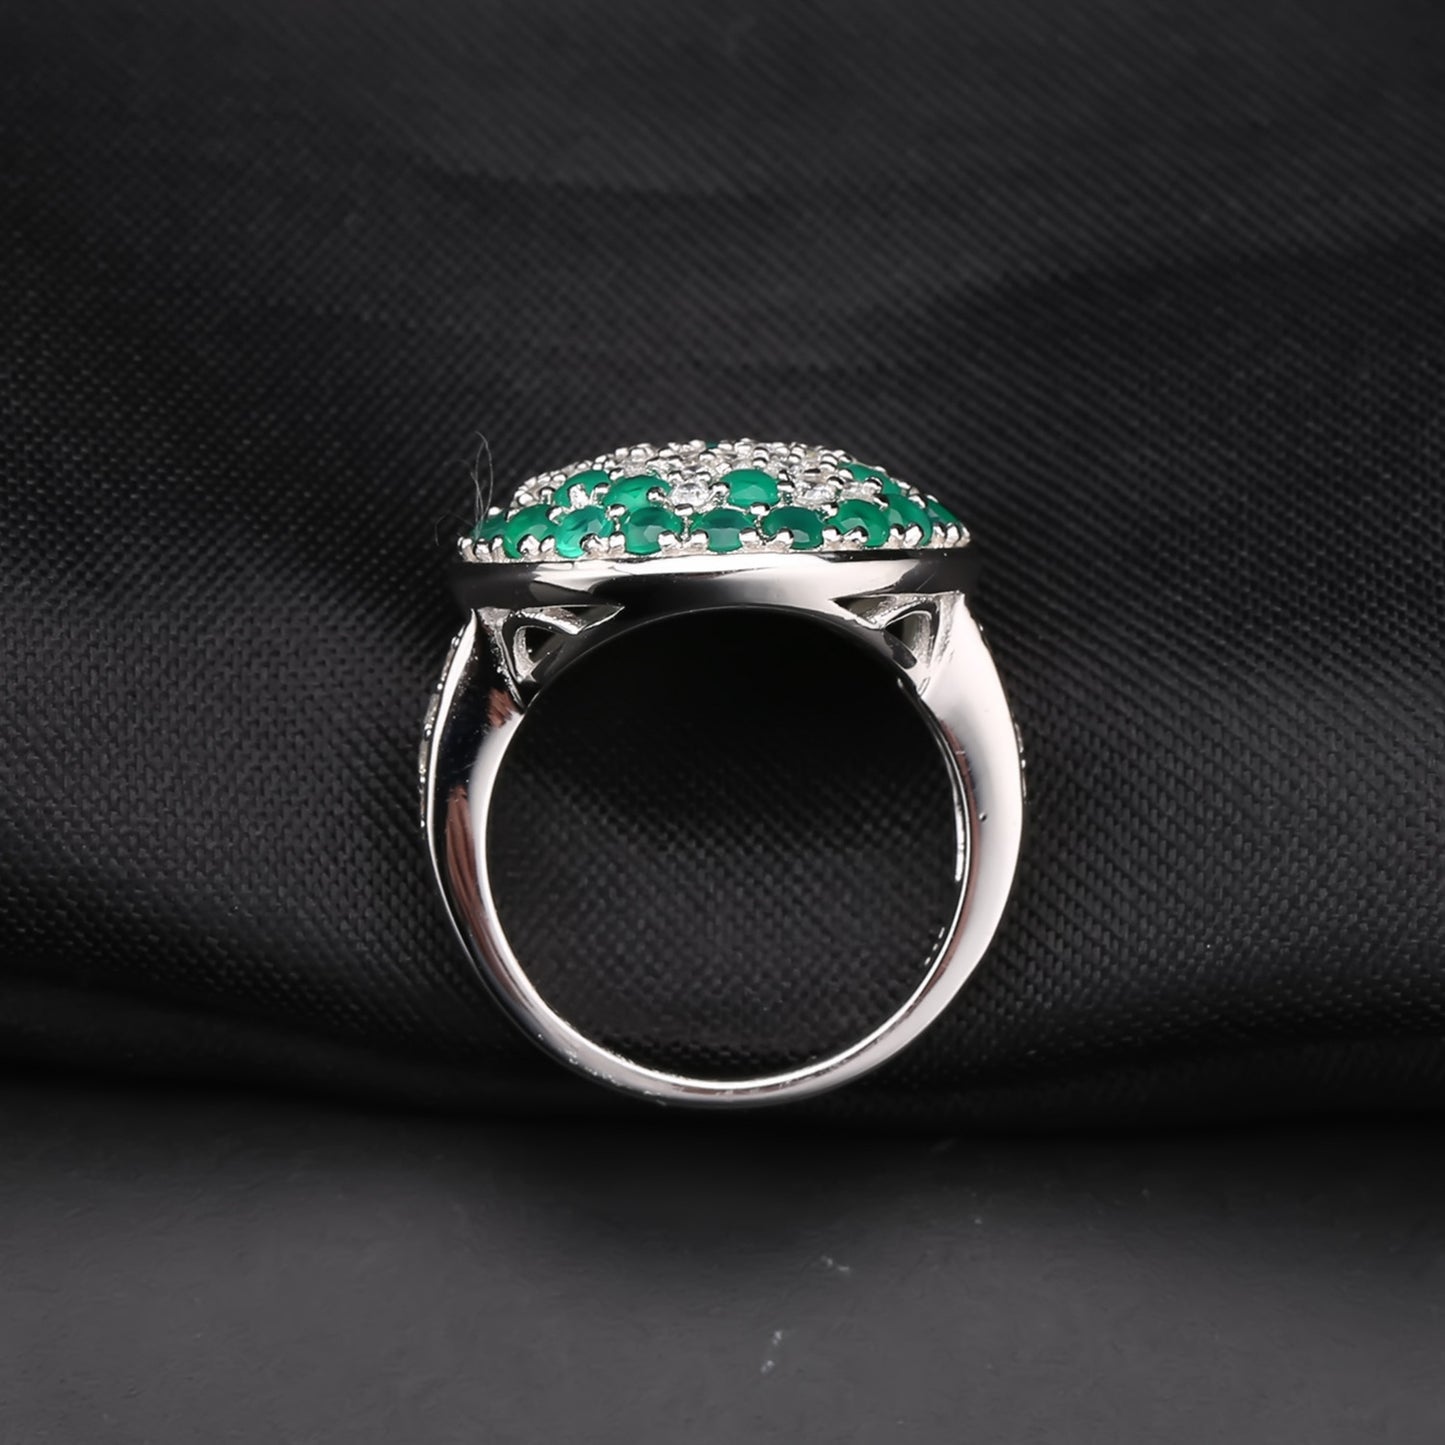 European Vintage Style Inlaid Green Agate Round Shape Silver Ring for Women